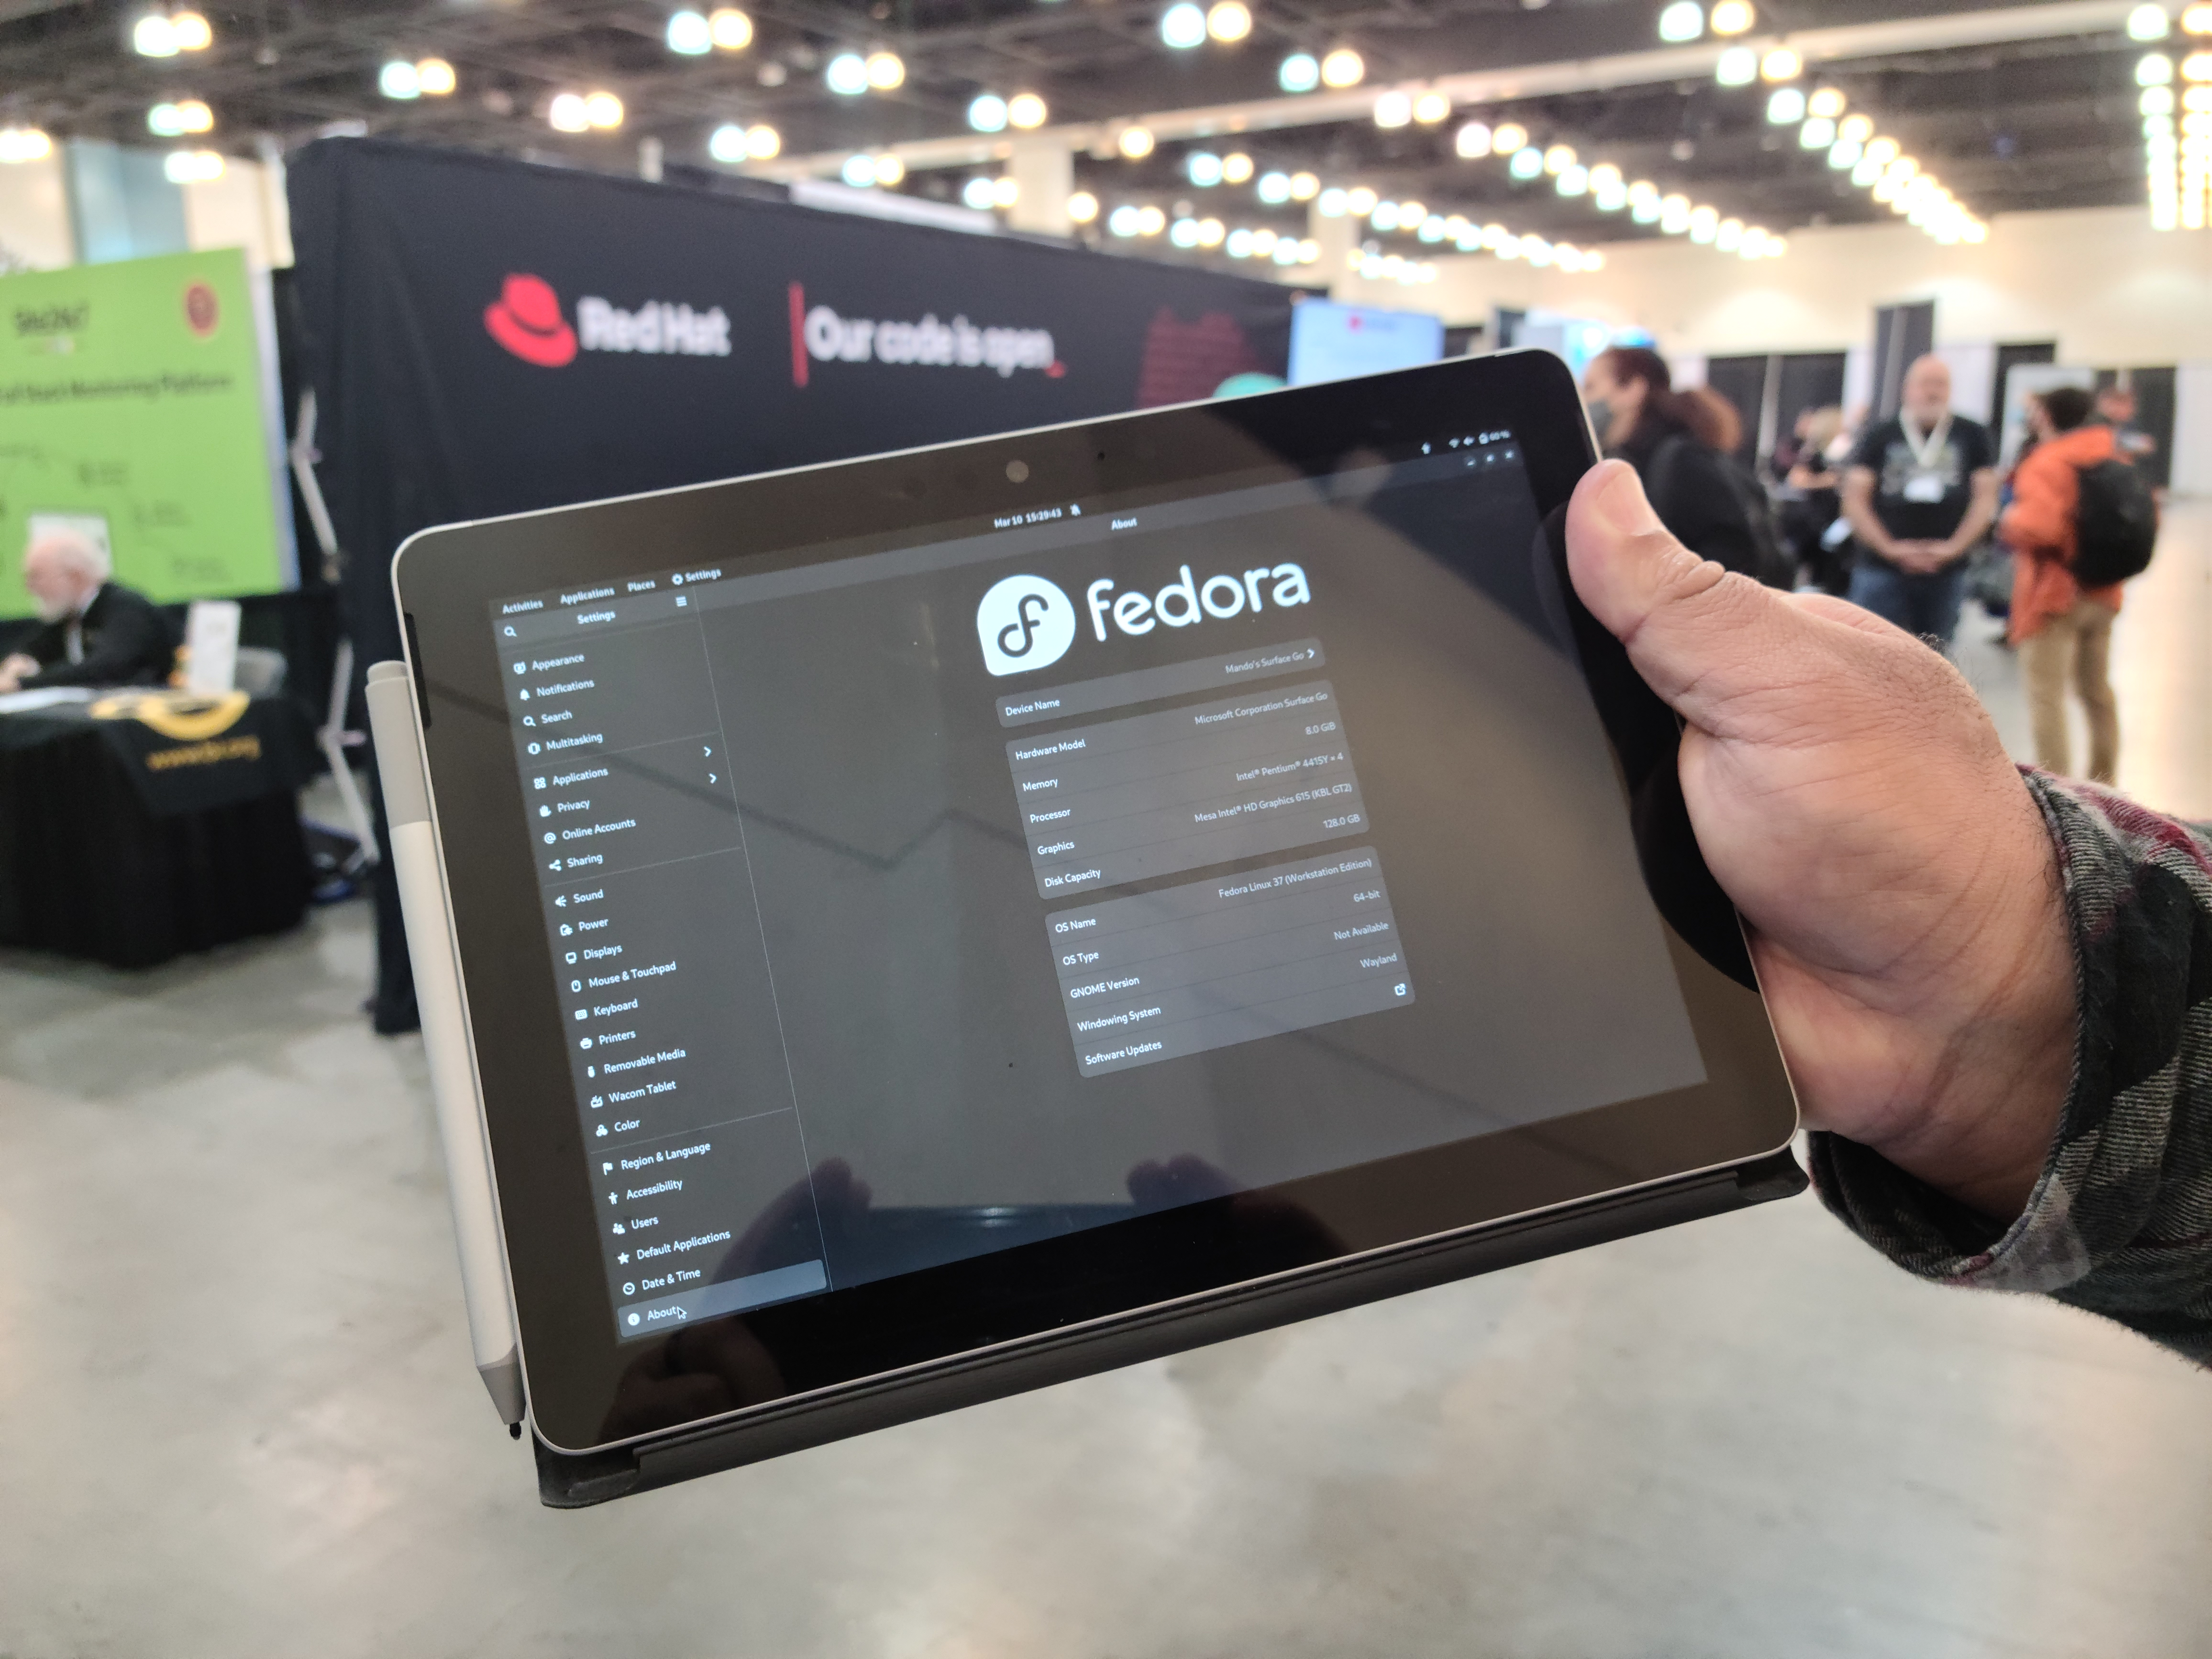 Fedora running on a Microsoft Surface Go tablet